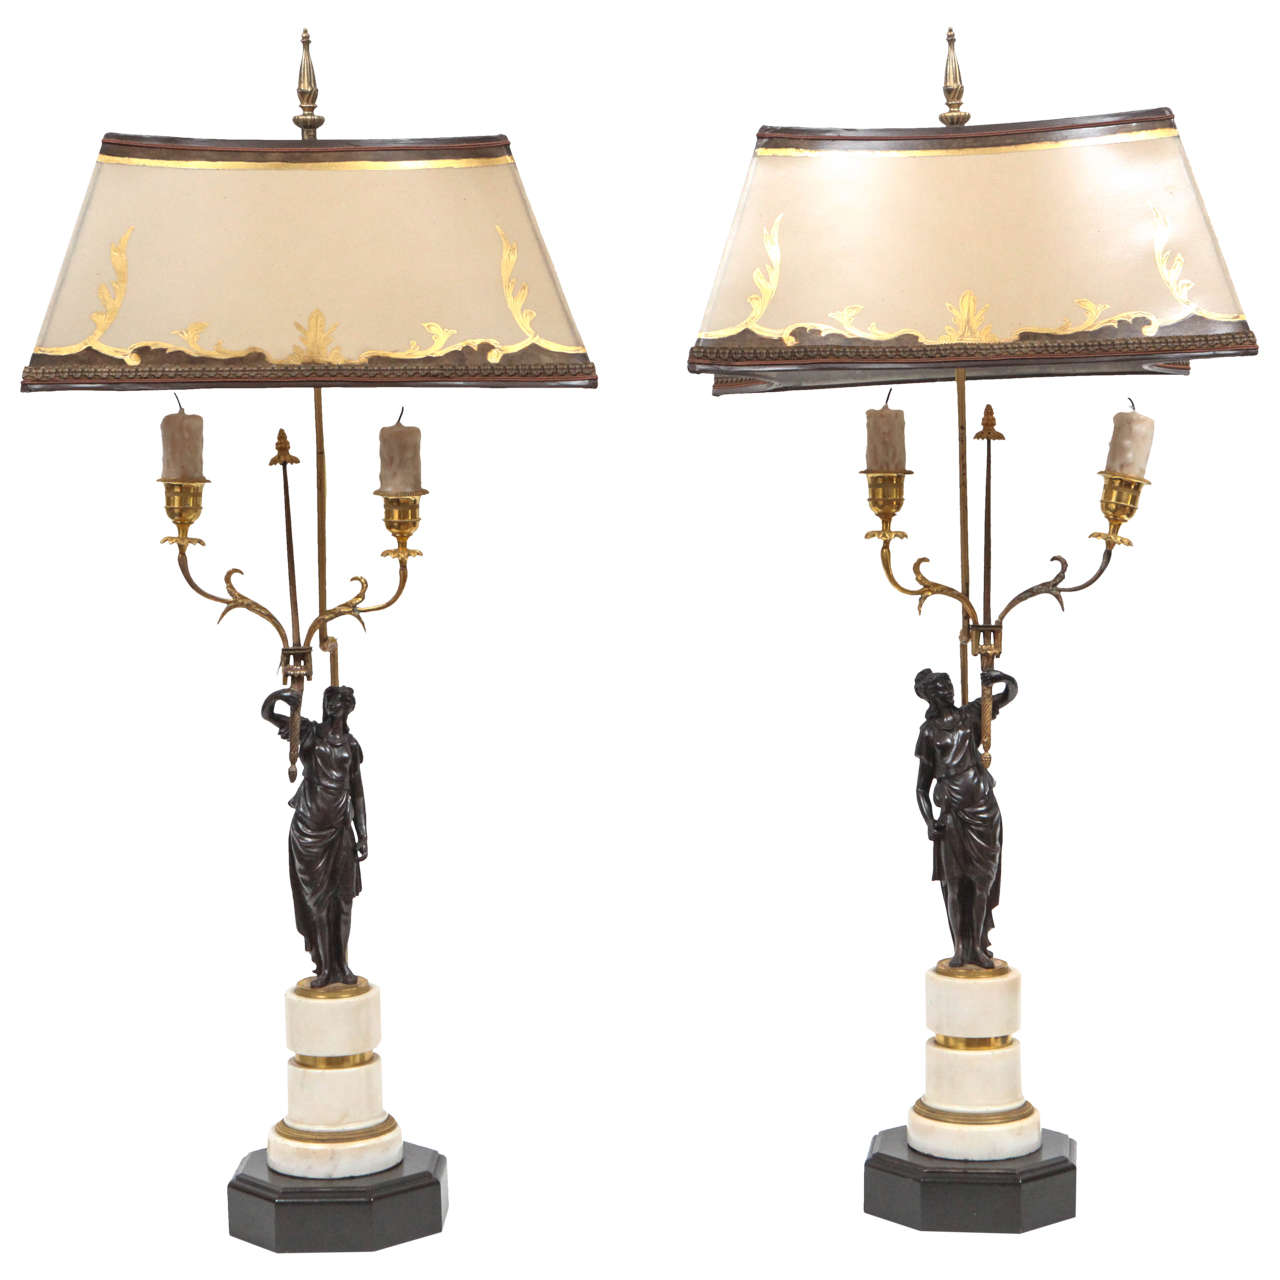 Pair of 19th Century French Marble and Bronze Candlestick Lamps